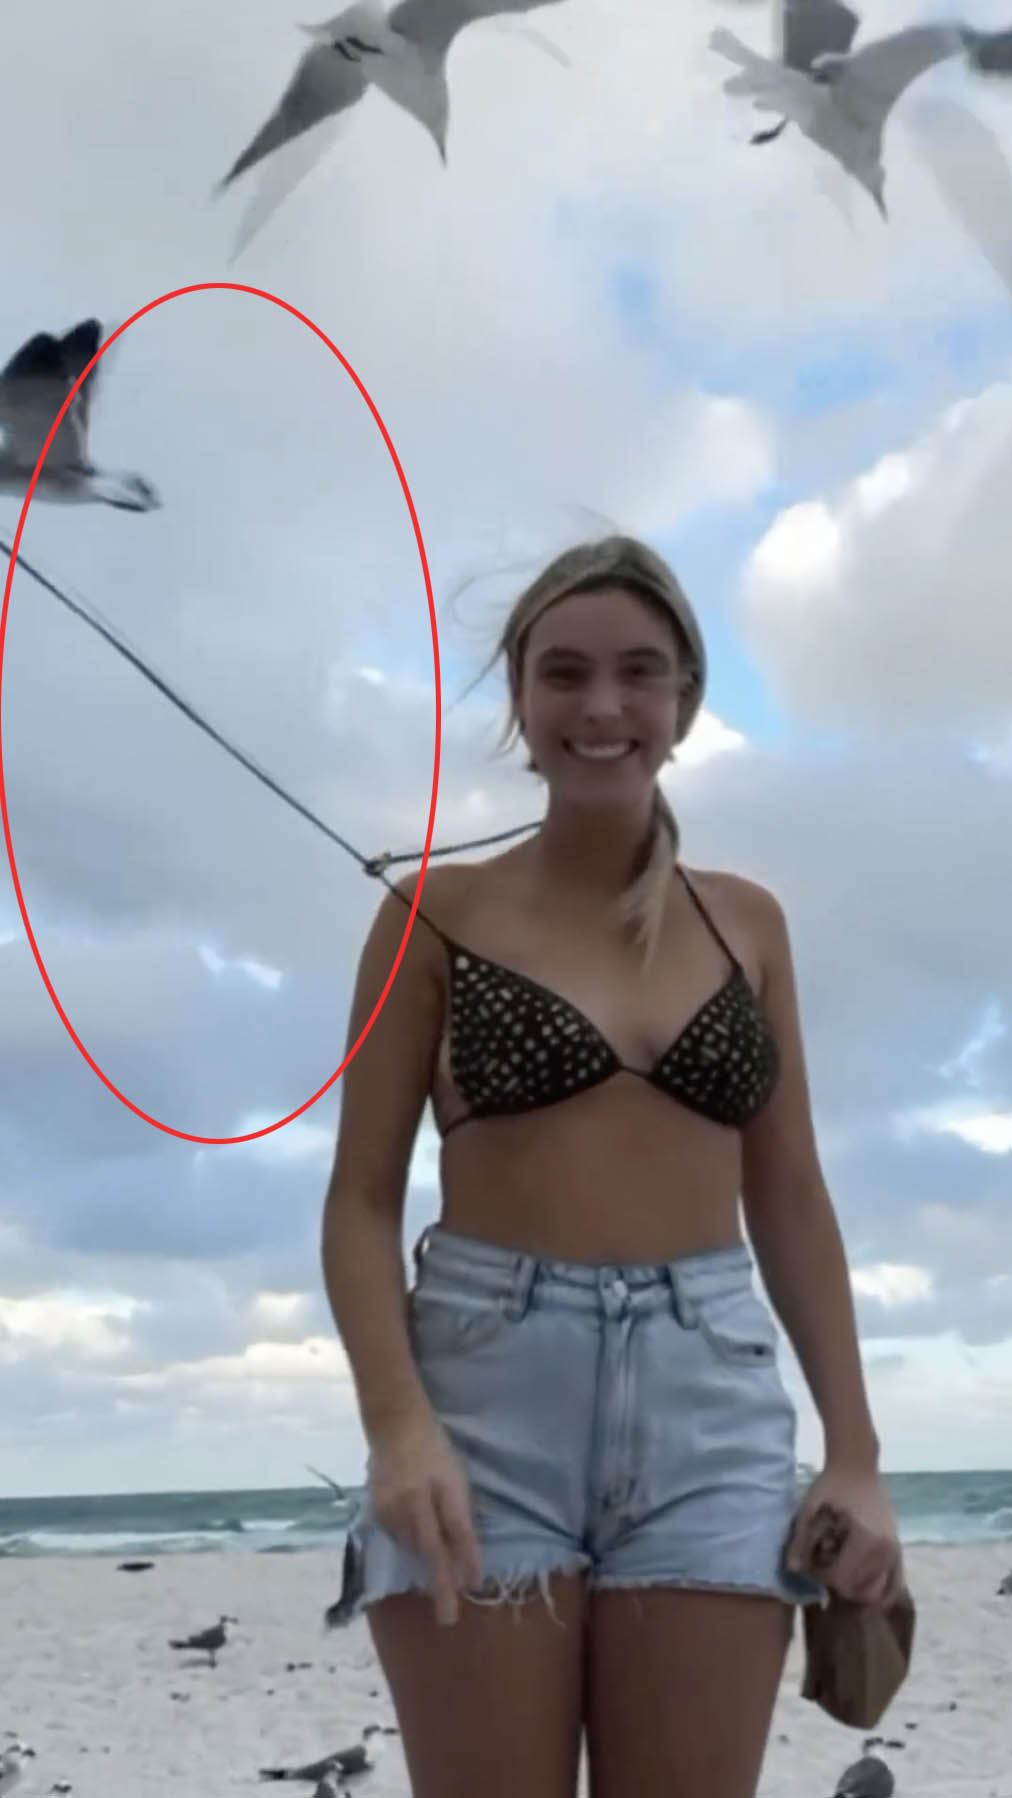 Lele Pons was filming content for her followers when a 'seagull' apparently swooped down